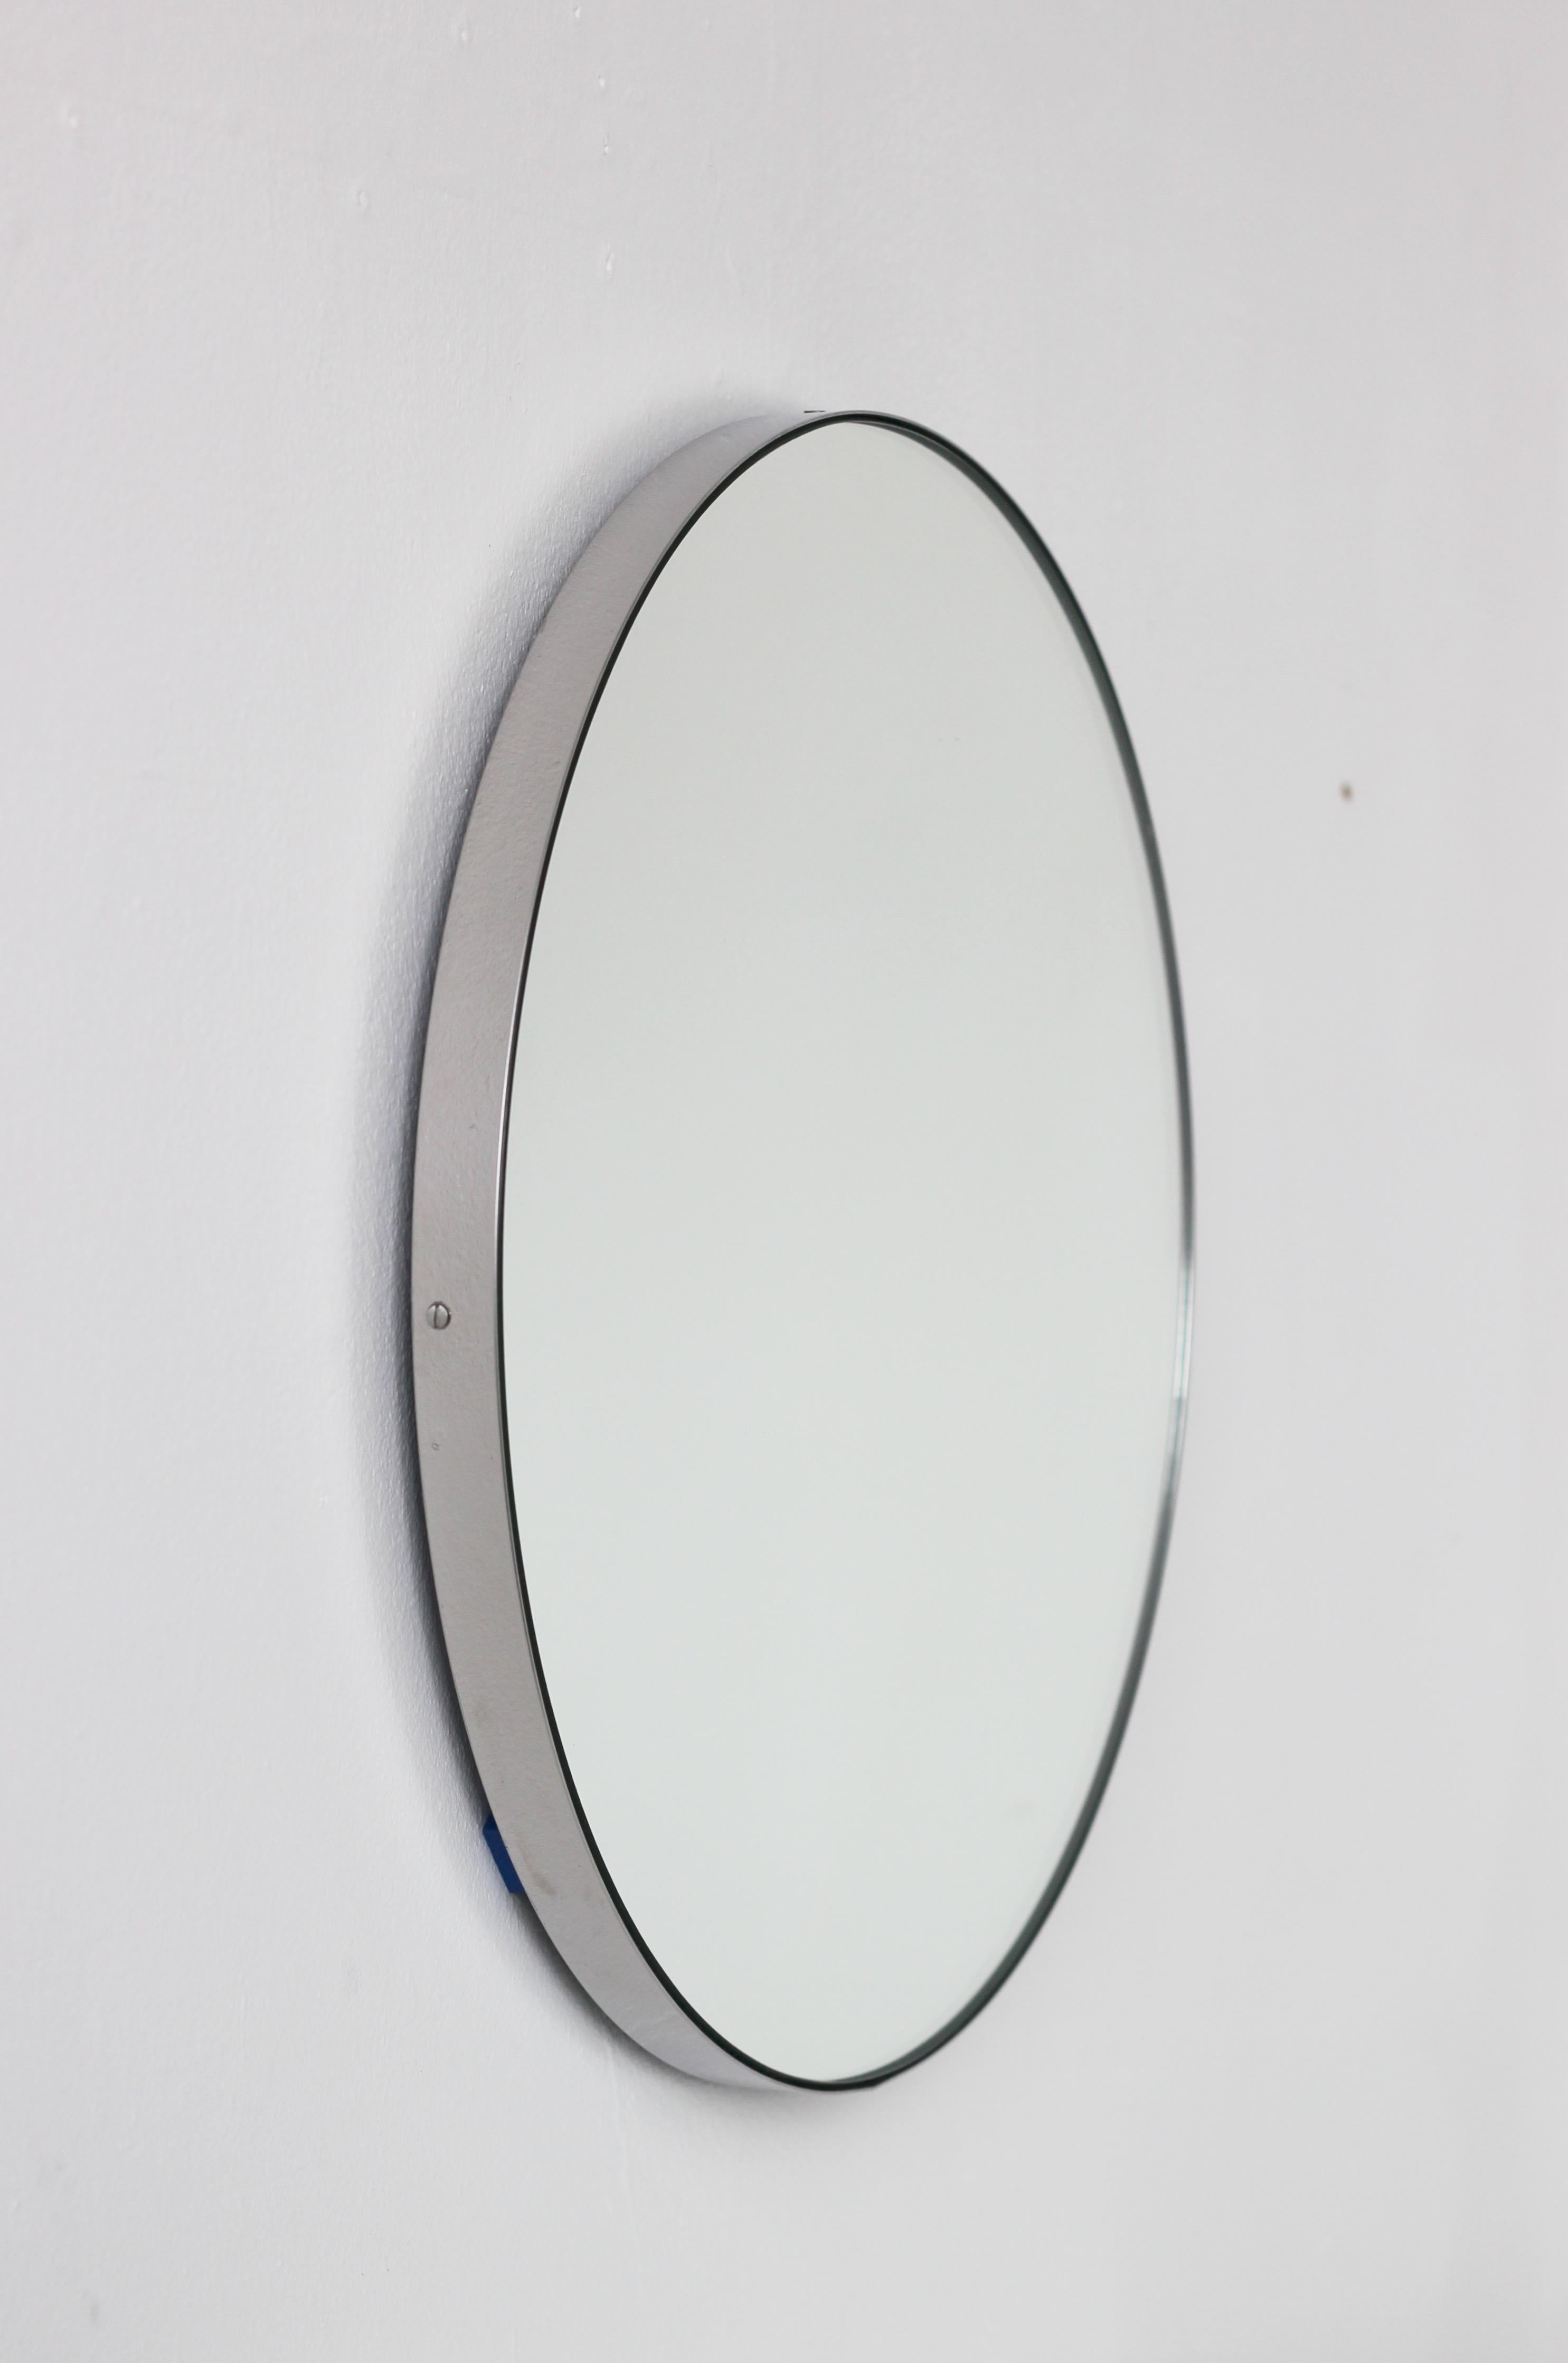 Minimalist round mirror with an elegant stainless steel brass frame. The detailing and finish, including visible screws, emphasise the crafty and quality feel of the mirror, a true signature of our brand. Designed and handcrafted in London,